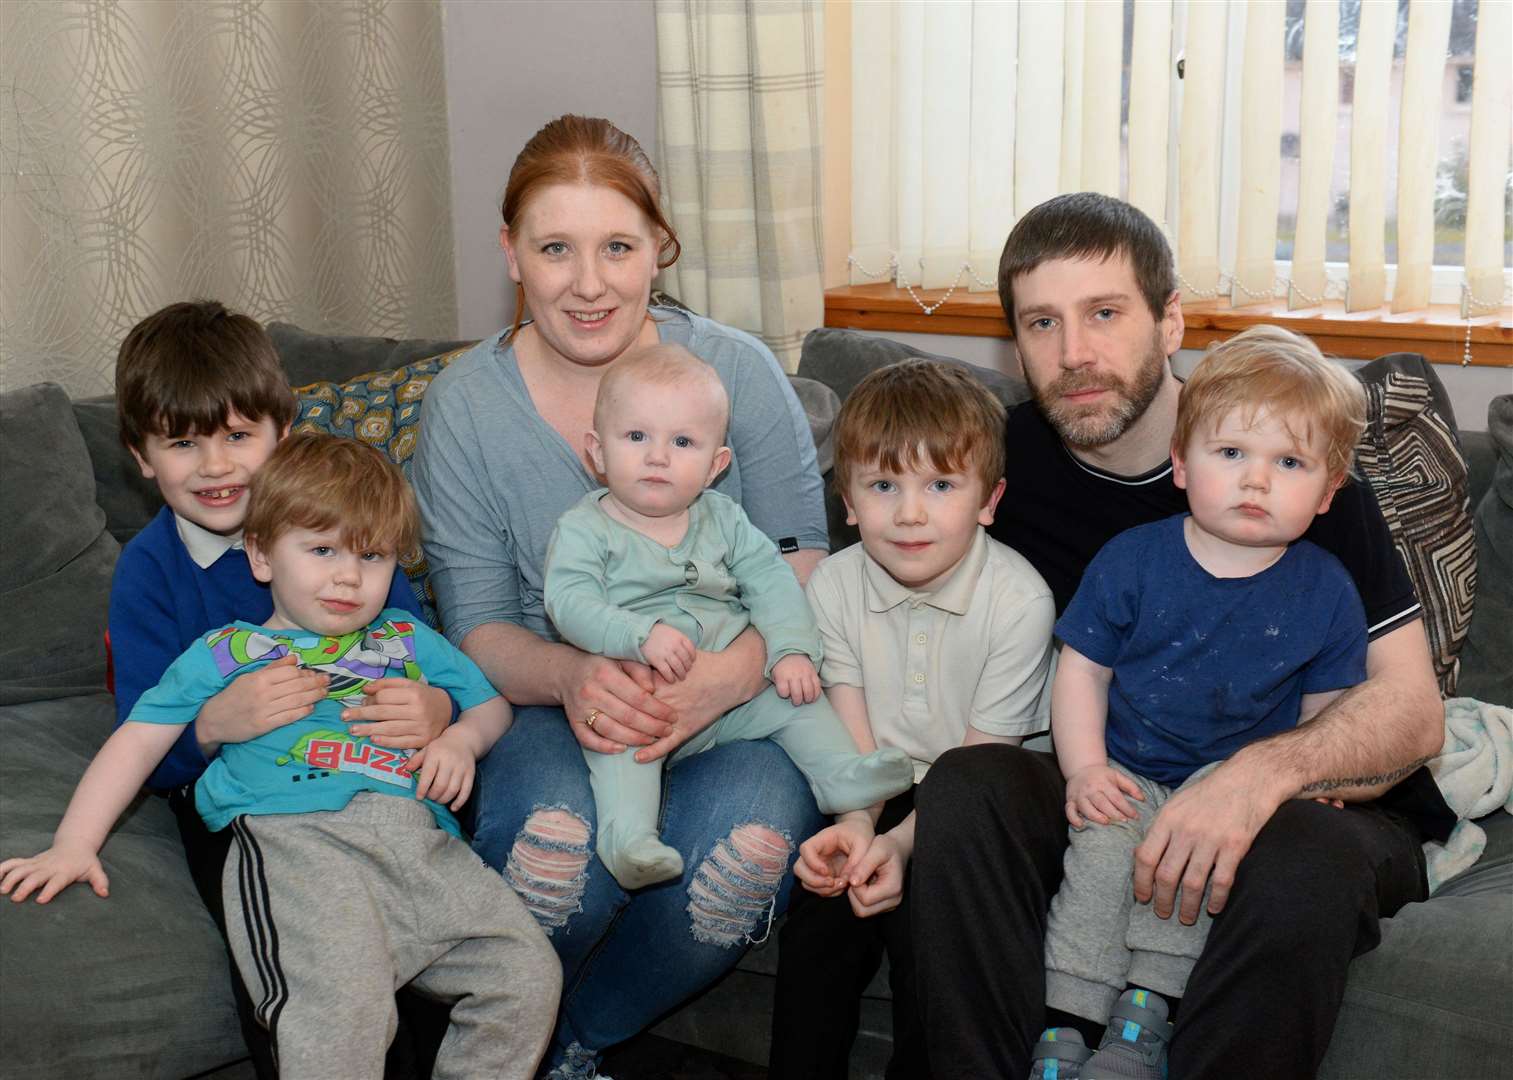 Claire Louise Bates and partner Kevin Johnston with children (from left) Kenzie, Kevin, Kobe, Klaine, and Kyler.